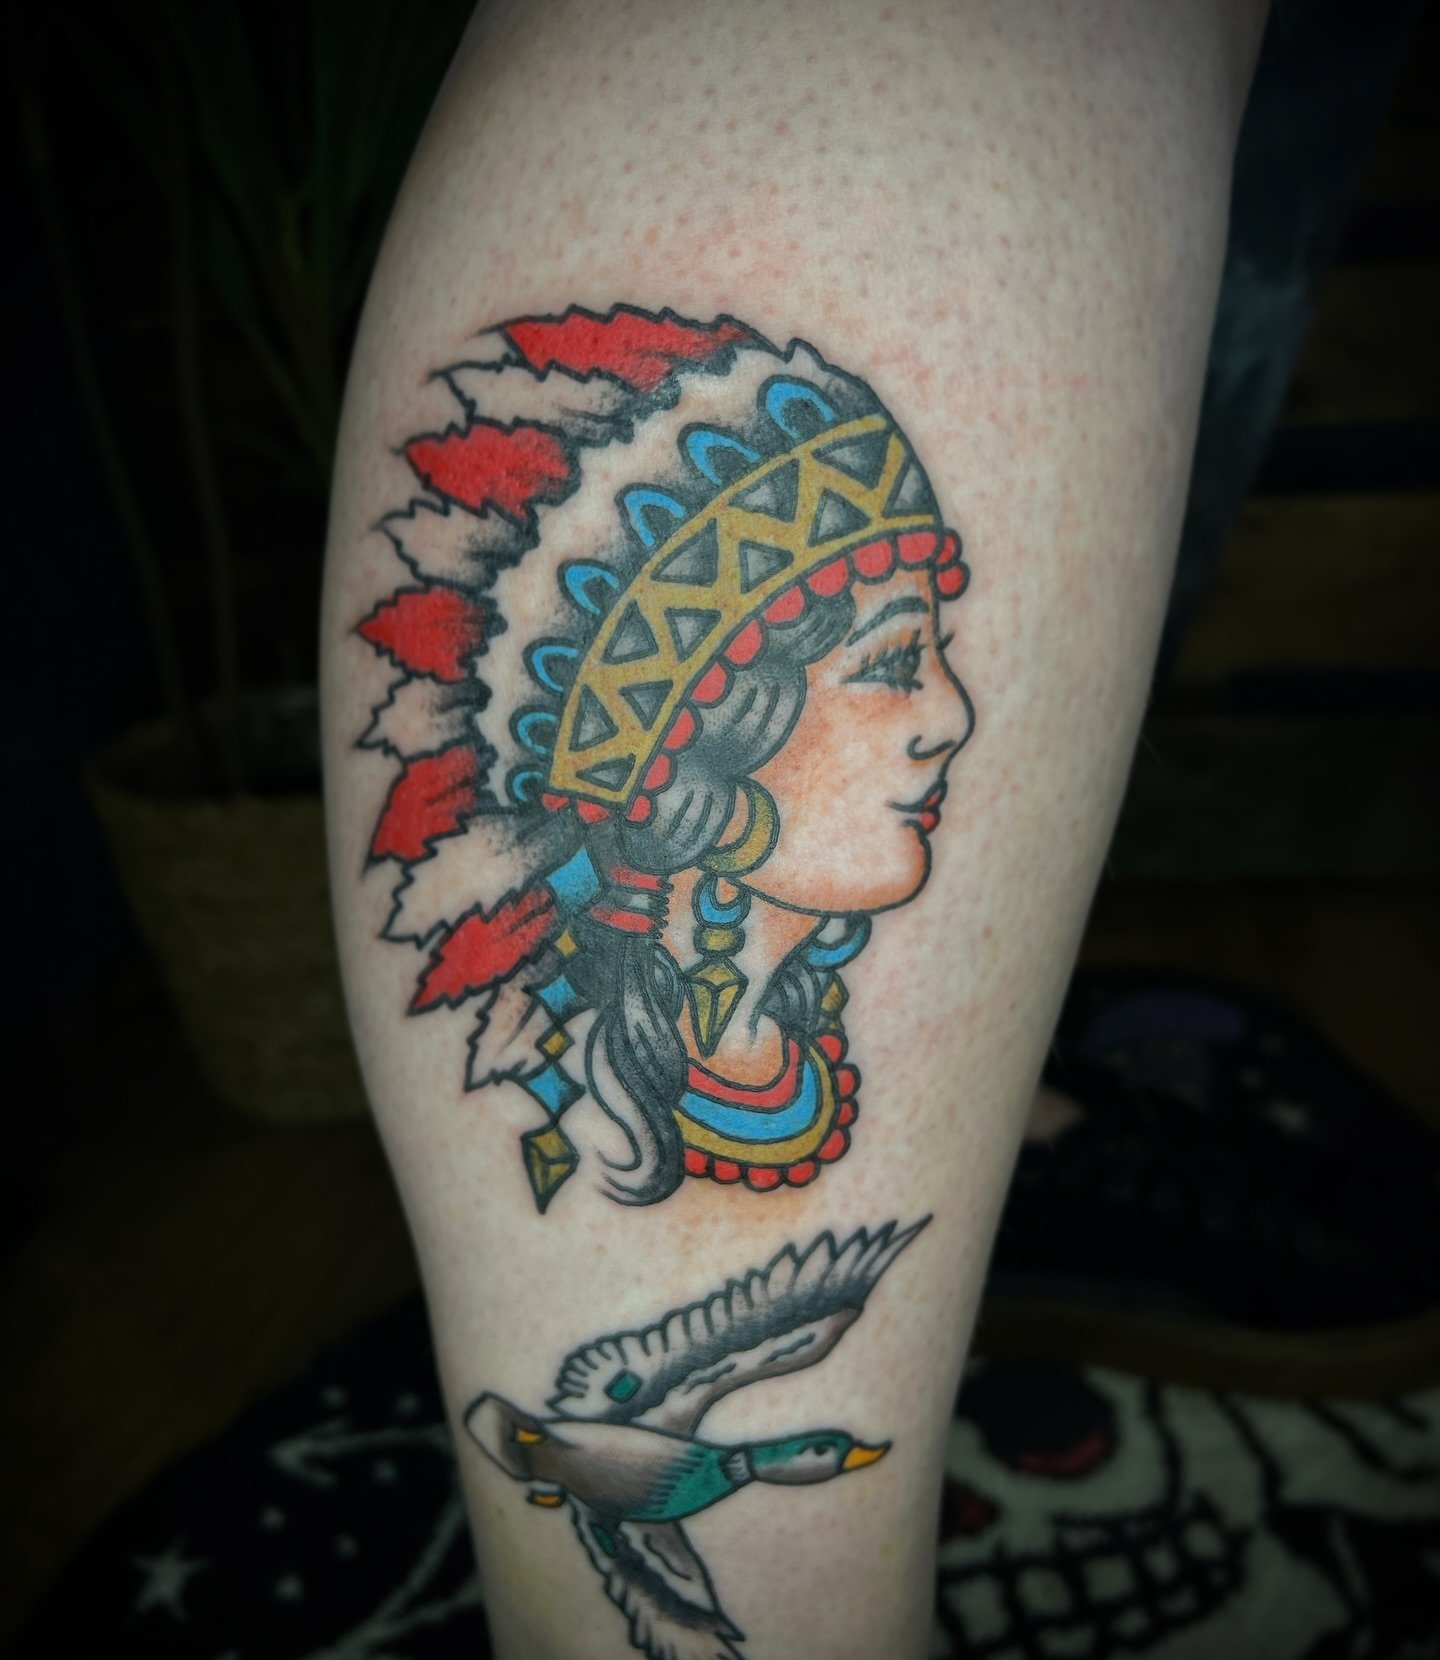 Native American girl head from my flash based on an old design, thanks Norman. 
-
-
-
-
-
-
-
-
-
-
-
-
-
#traditionaltattoos #traditionaltattoo #tradtattoo #oldschooltattoo #staffordshiretattoo #staffordshire #stokeontrent #stokeontrenttattoo #newca